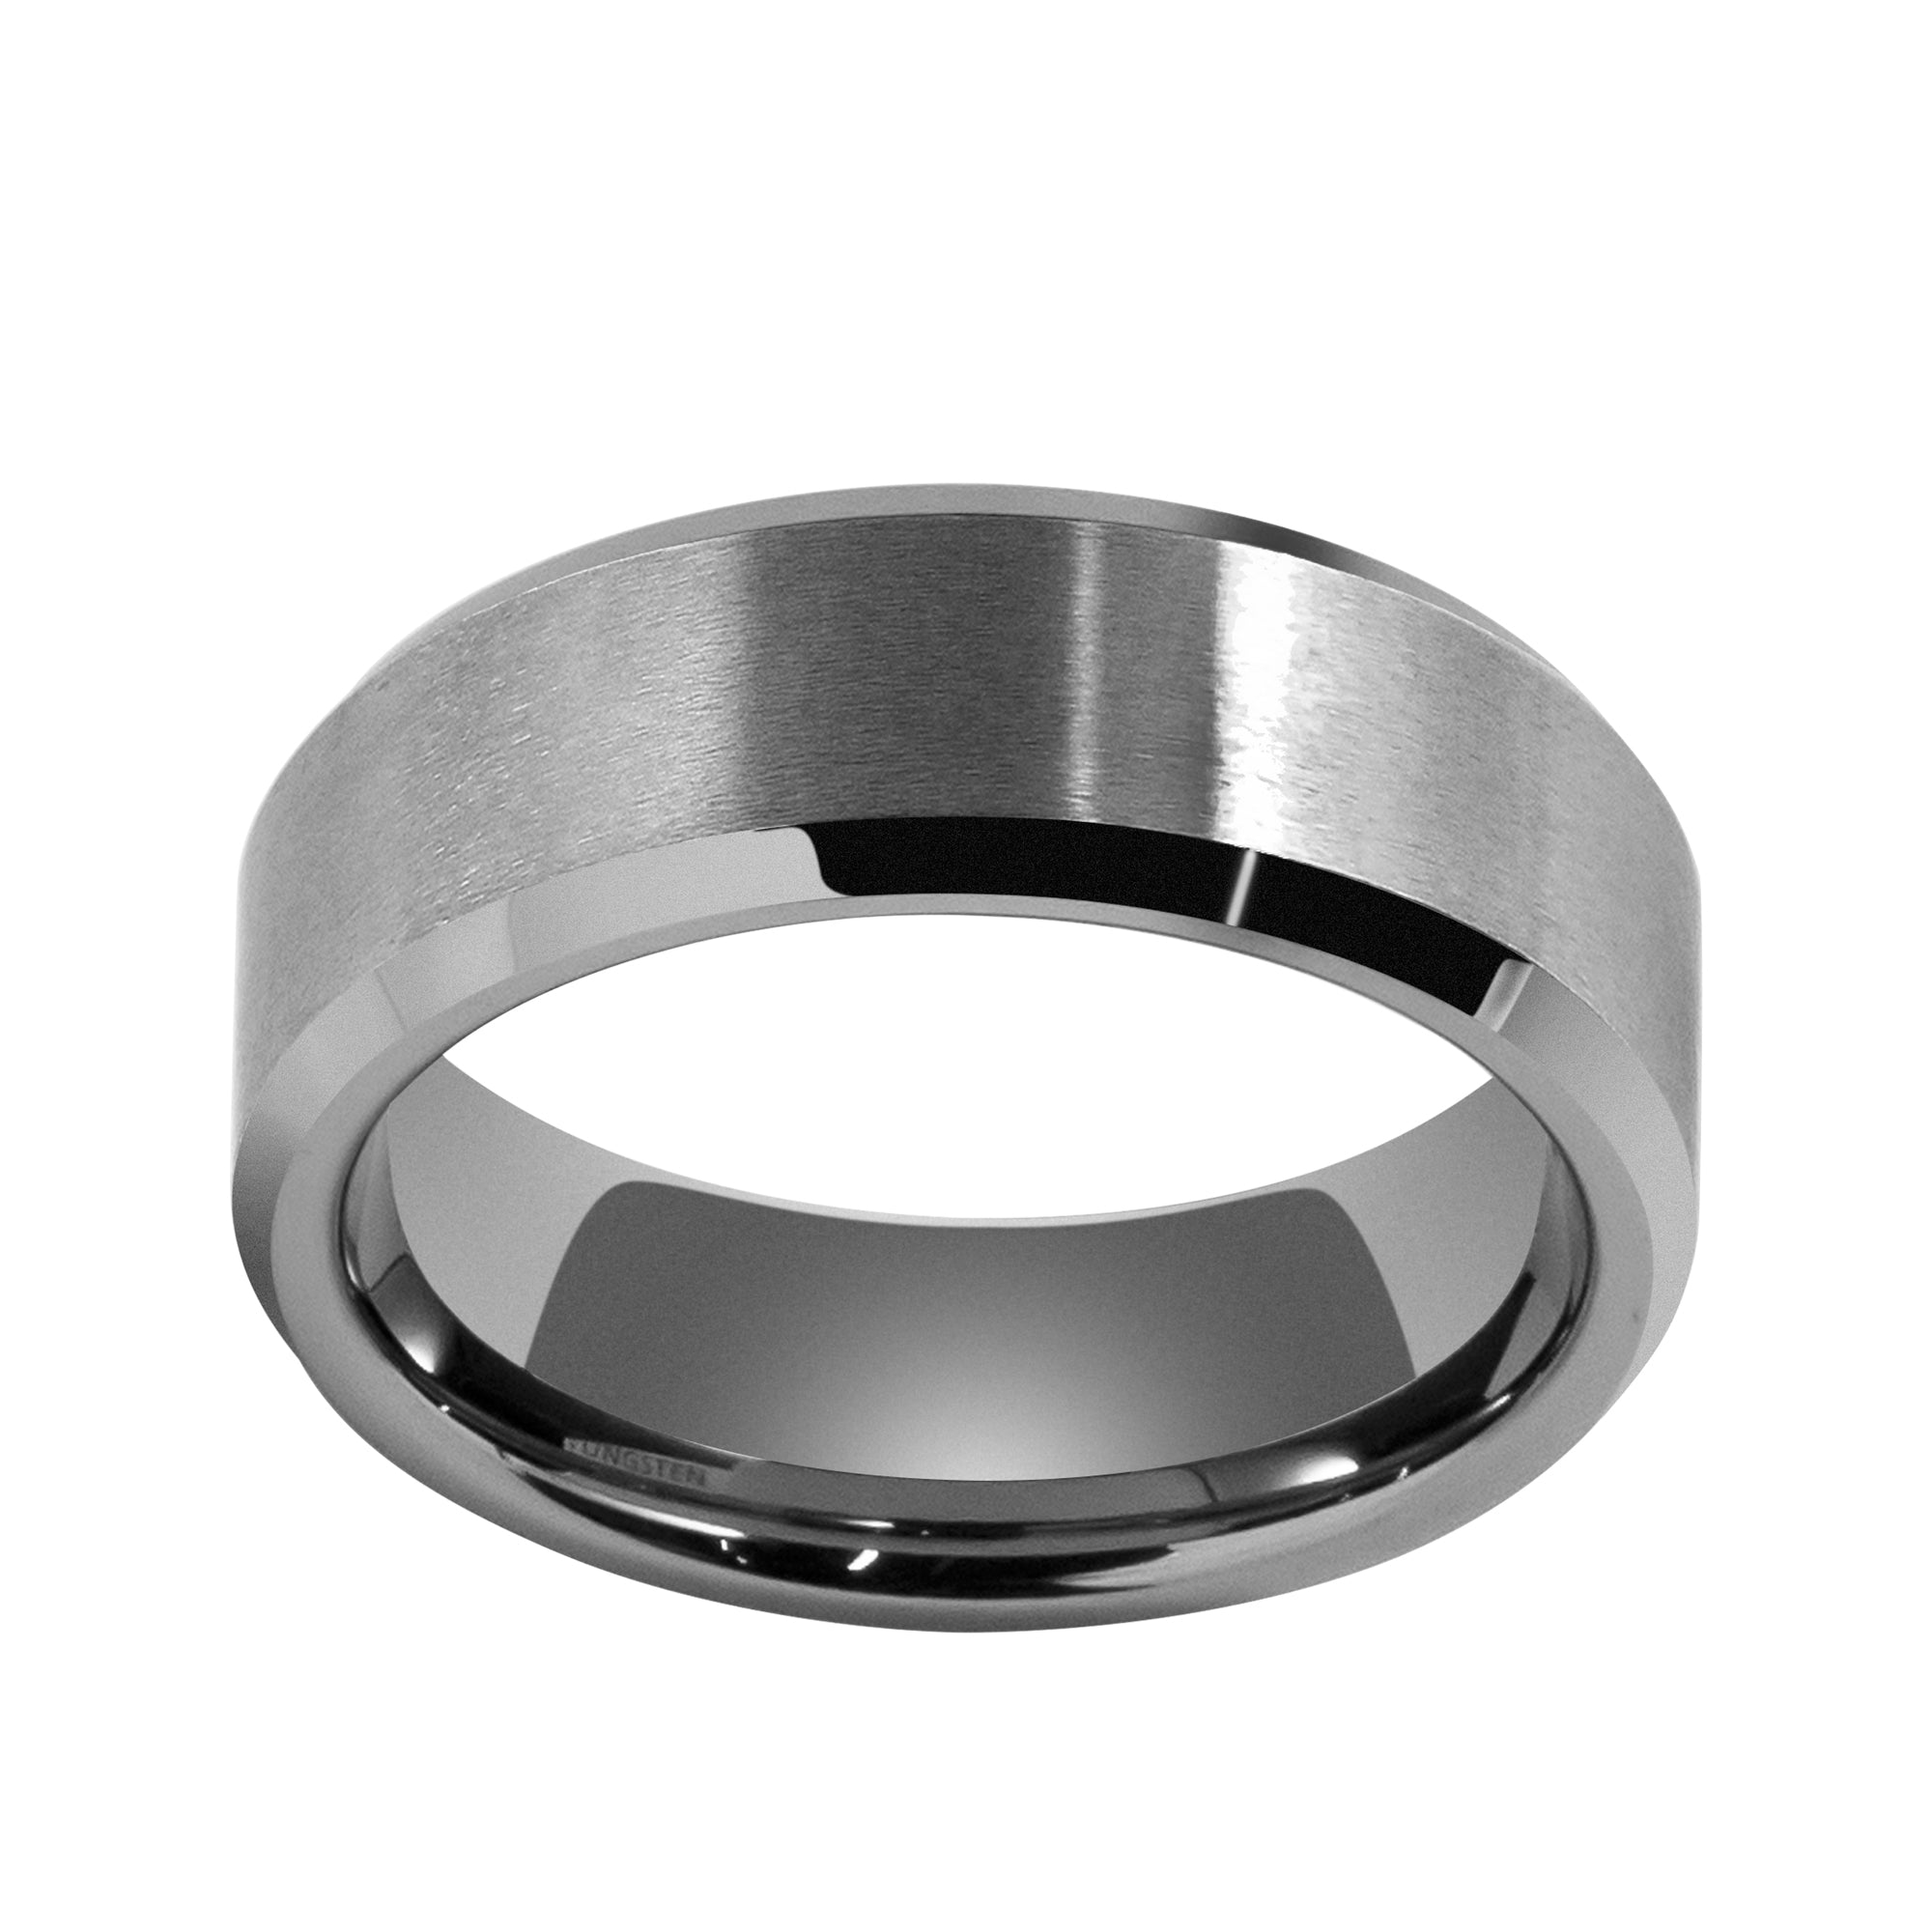 Satin Finished Metallic Tungsten Carbide Ring with Polished Beveled Edge, 8MM